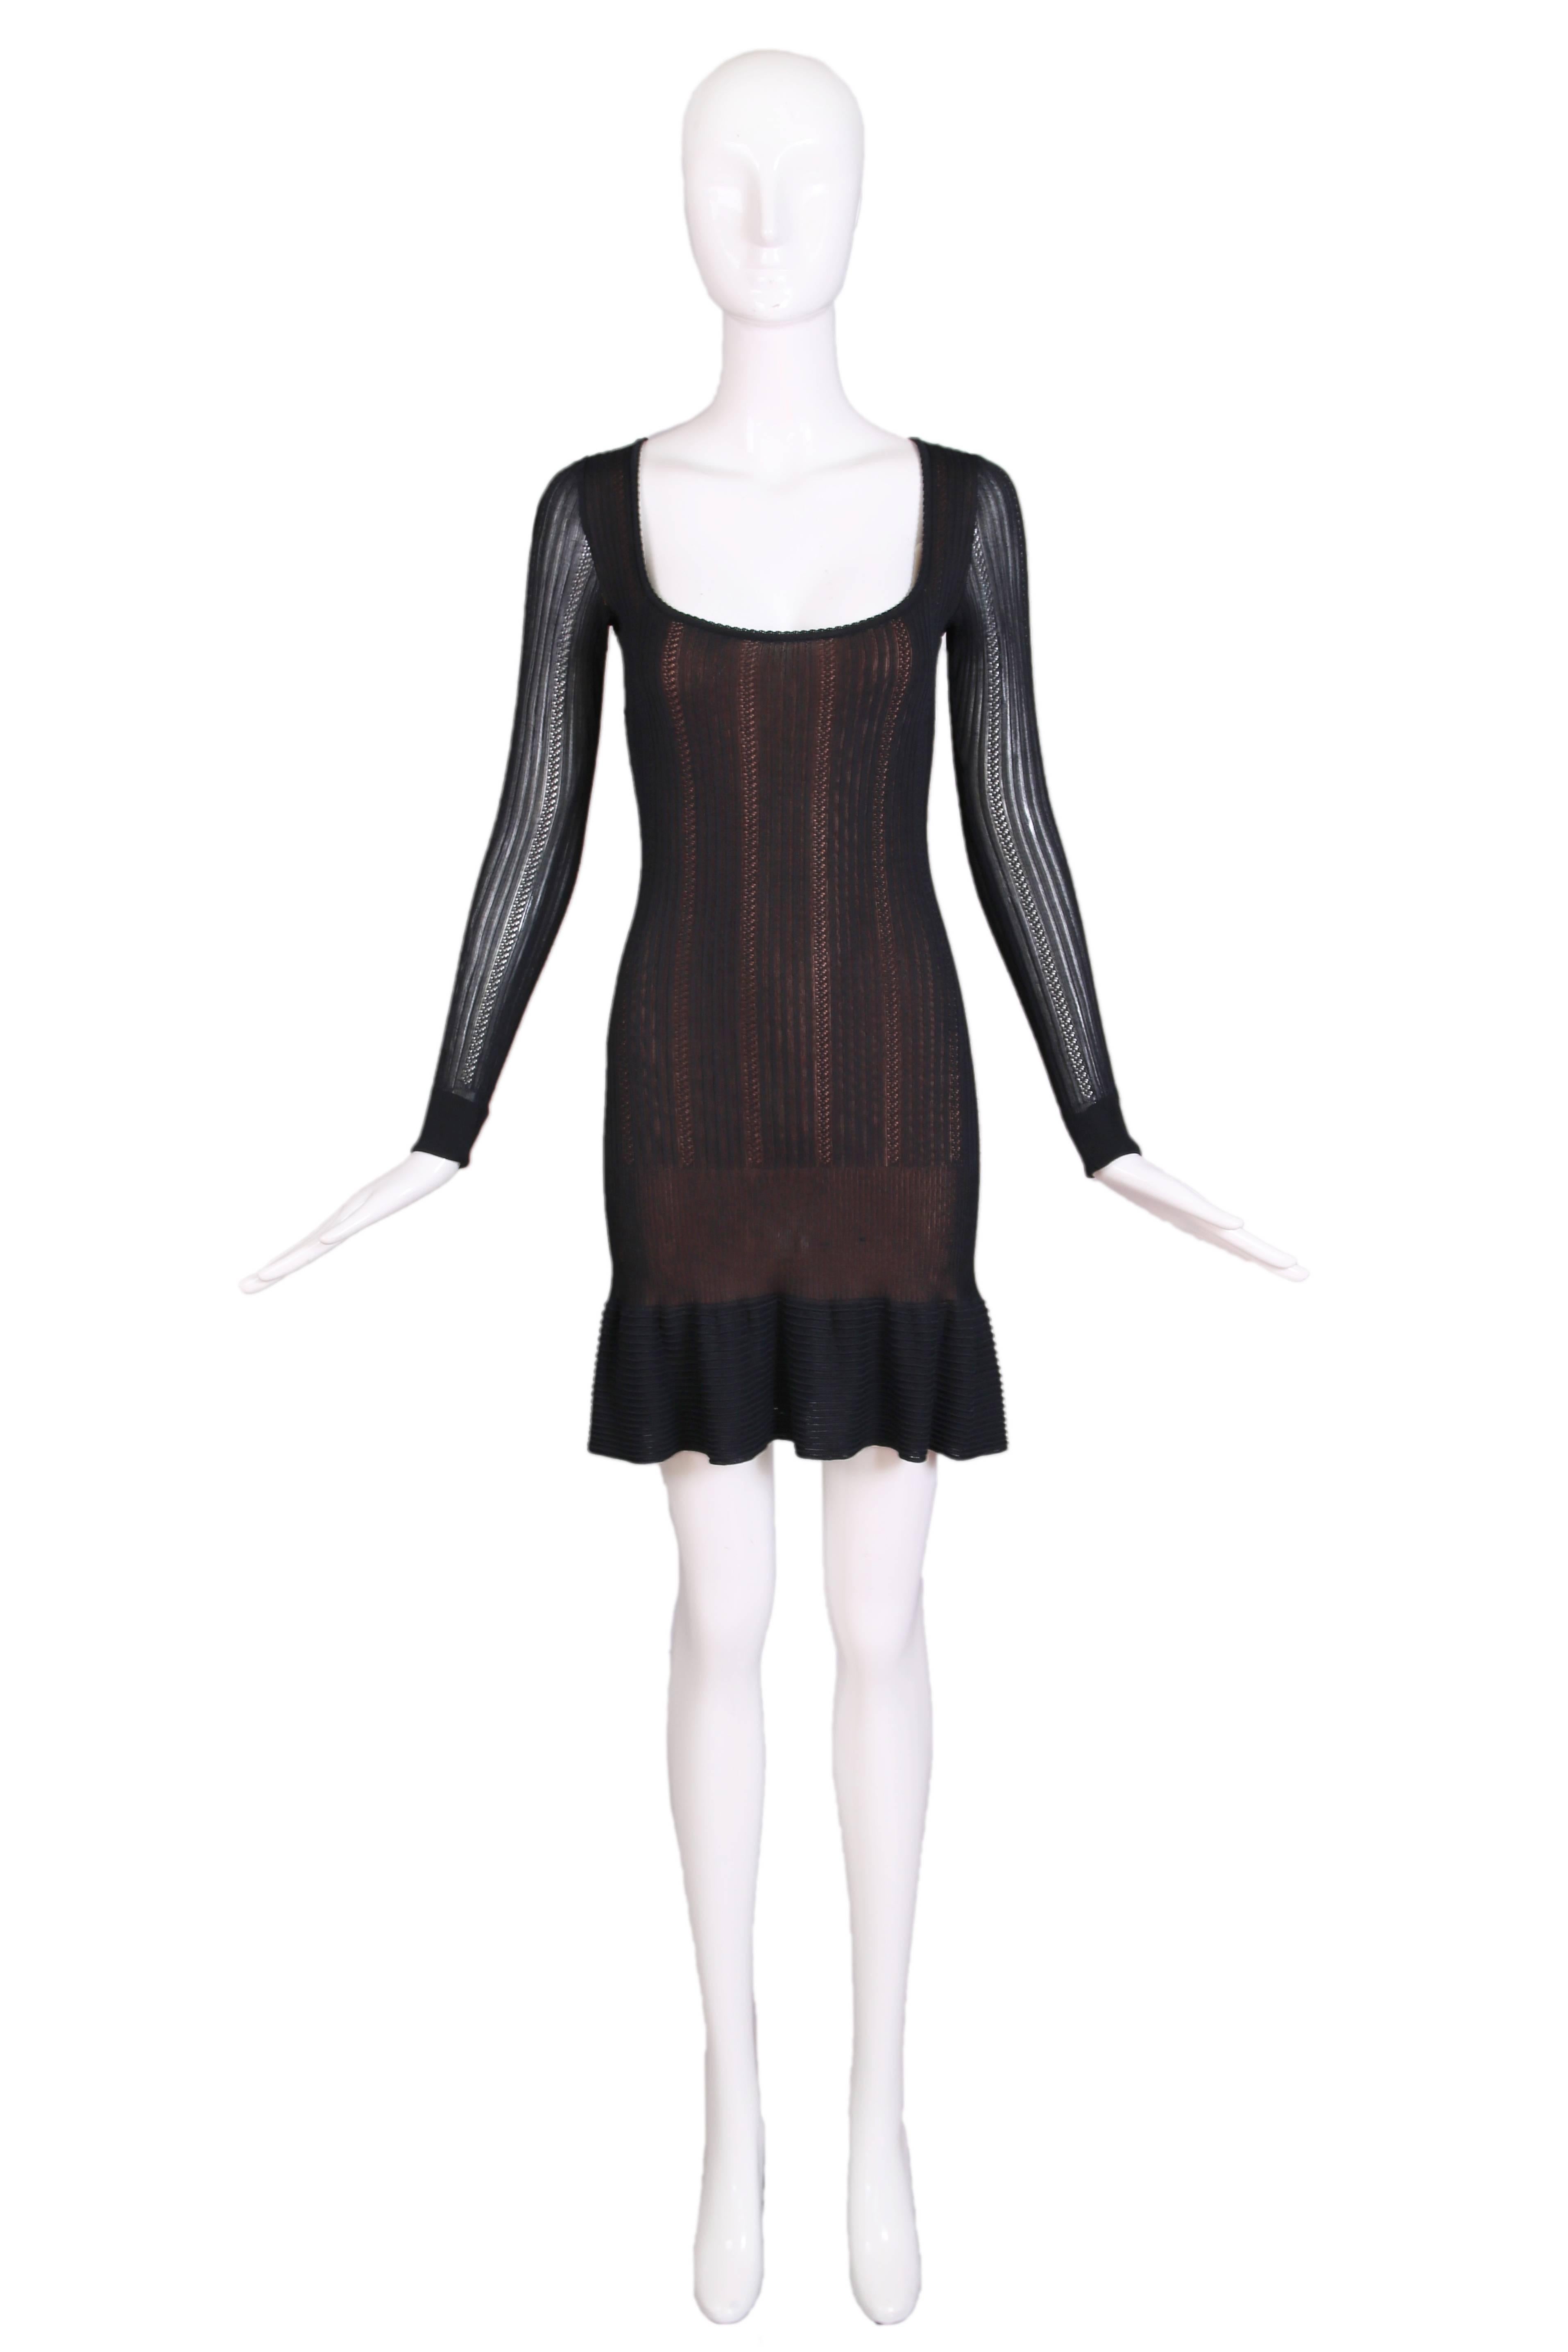 Vintage Azzedine Alaia black sheer stretch viscose long sleeved mini dress with scooped neck and flounced hem. Bodice has a nude-colored lining. In excellent condition. No size tag, please consult measurements.
MEASUREMENTS:
Bust - 32"
Waist -